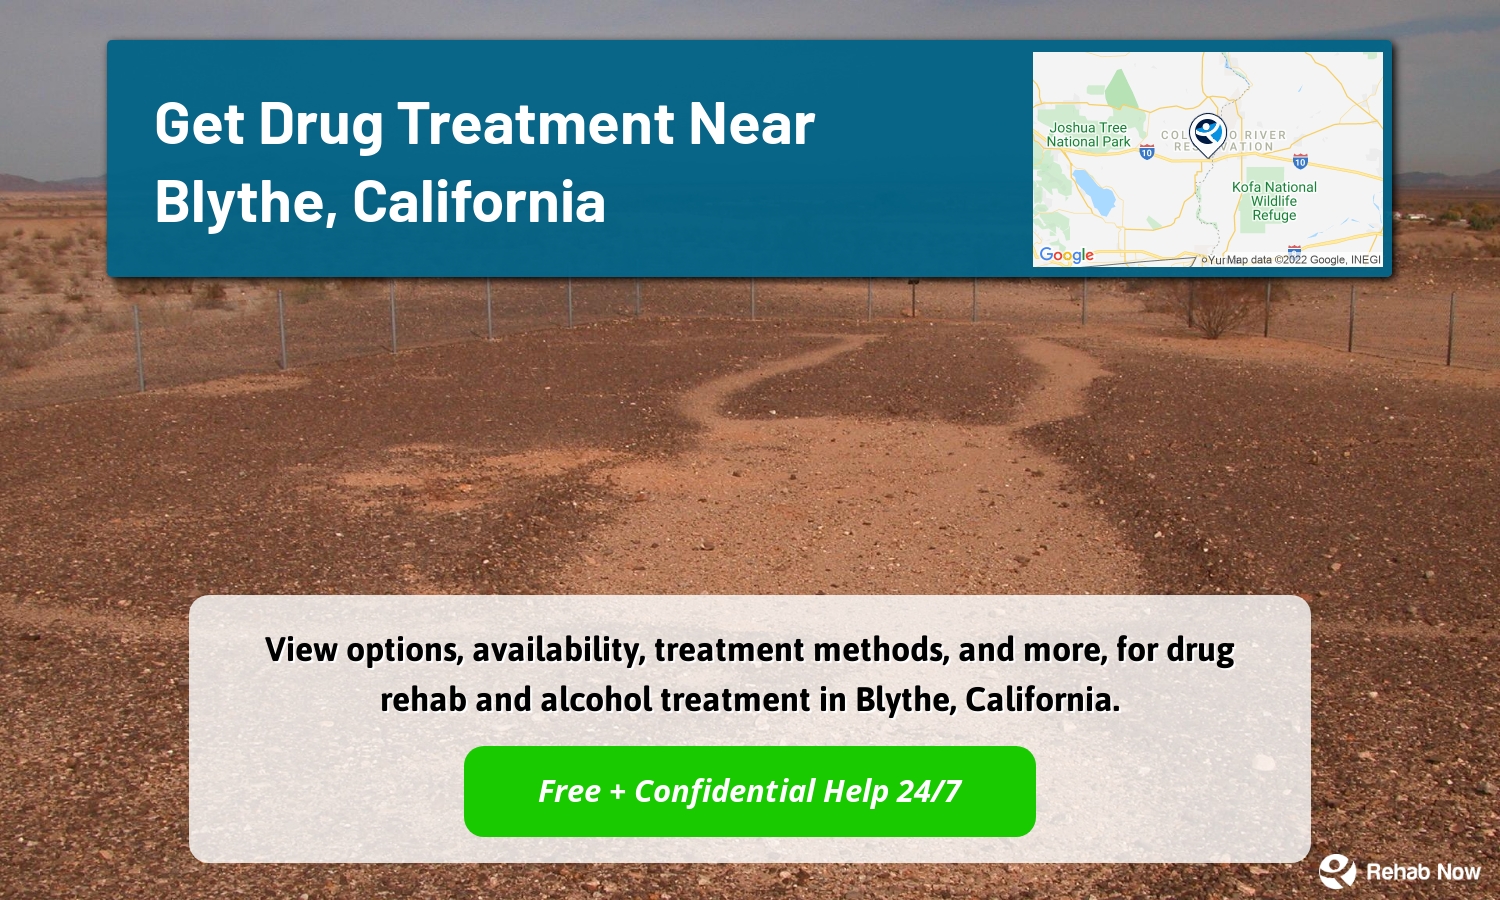 View options, availability, treatment methods, and more, for drug rehab and alcohol treatment in Blythe, California.